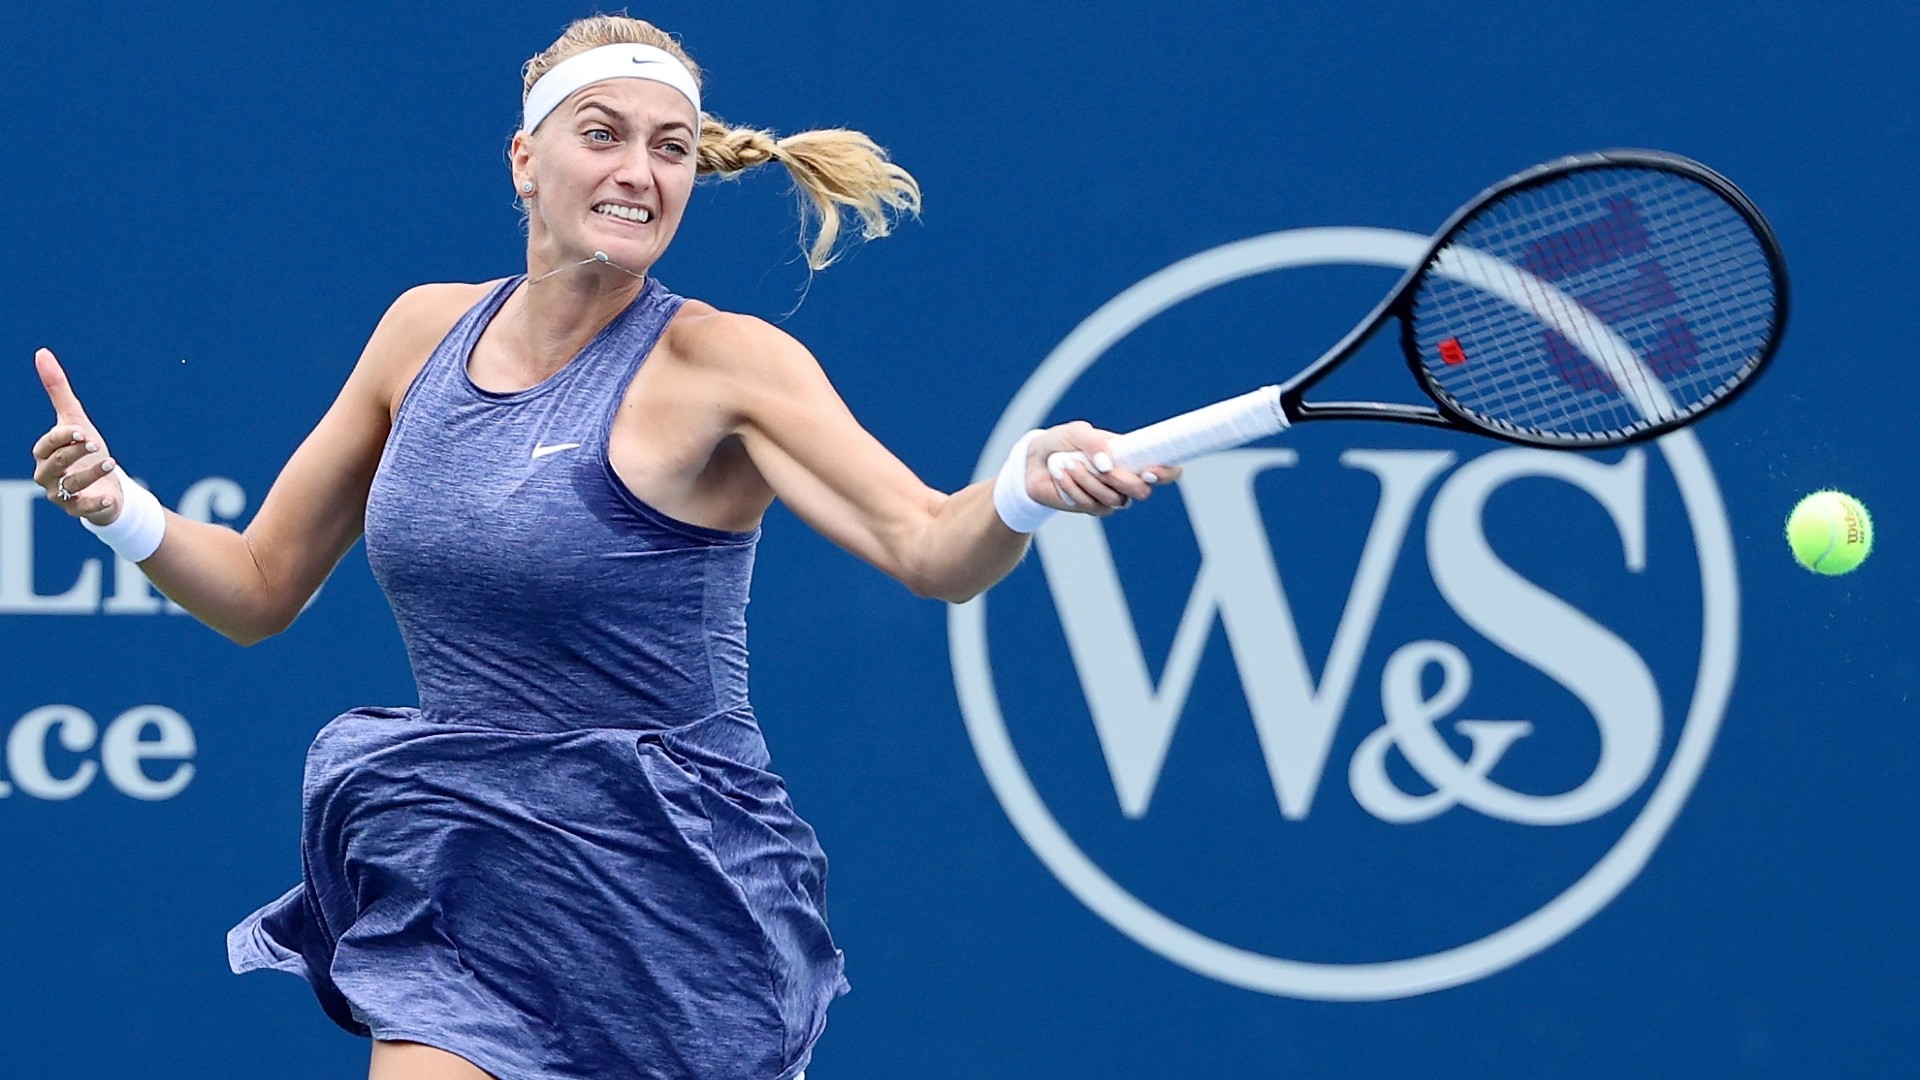 Petra Kvitova beat 2019 champion Madison Keys in straight sets at the Western and Southern Open in Cincinnati.